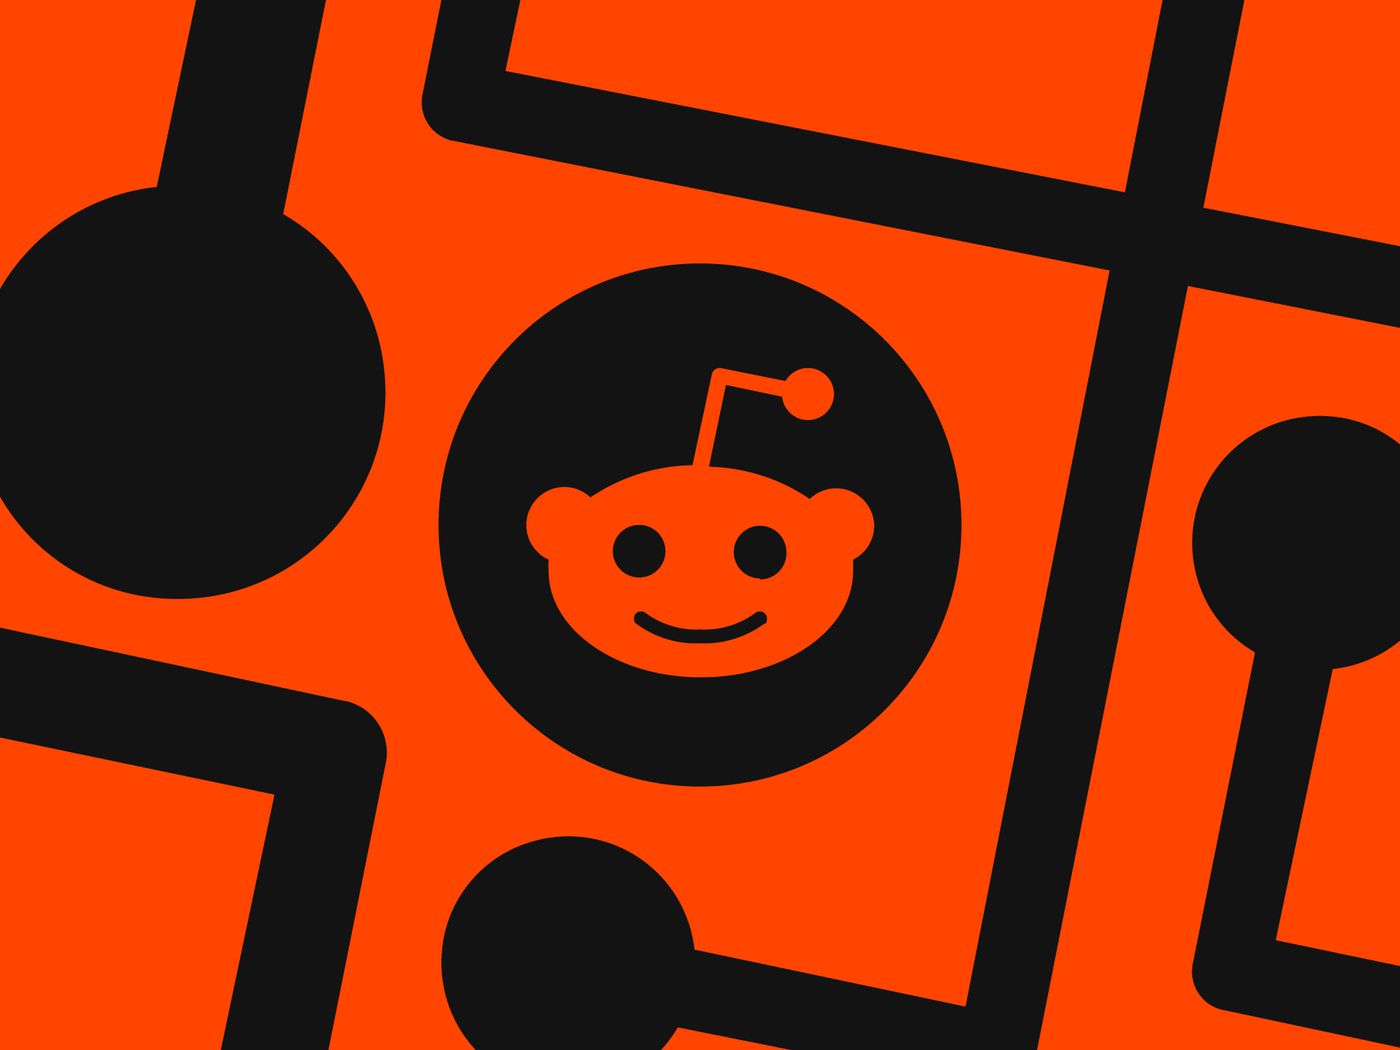 Reddit To Launch IPO In March, Reports Suggest